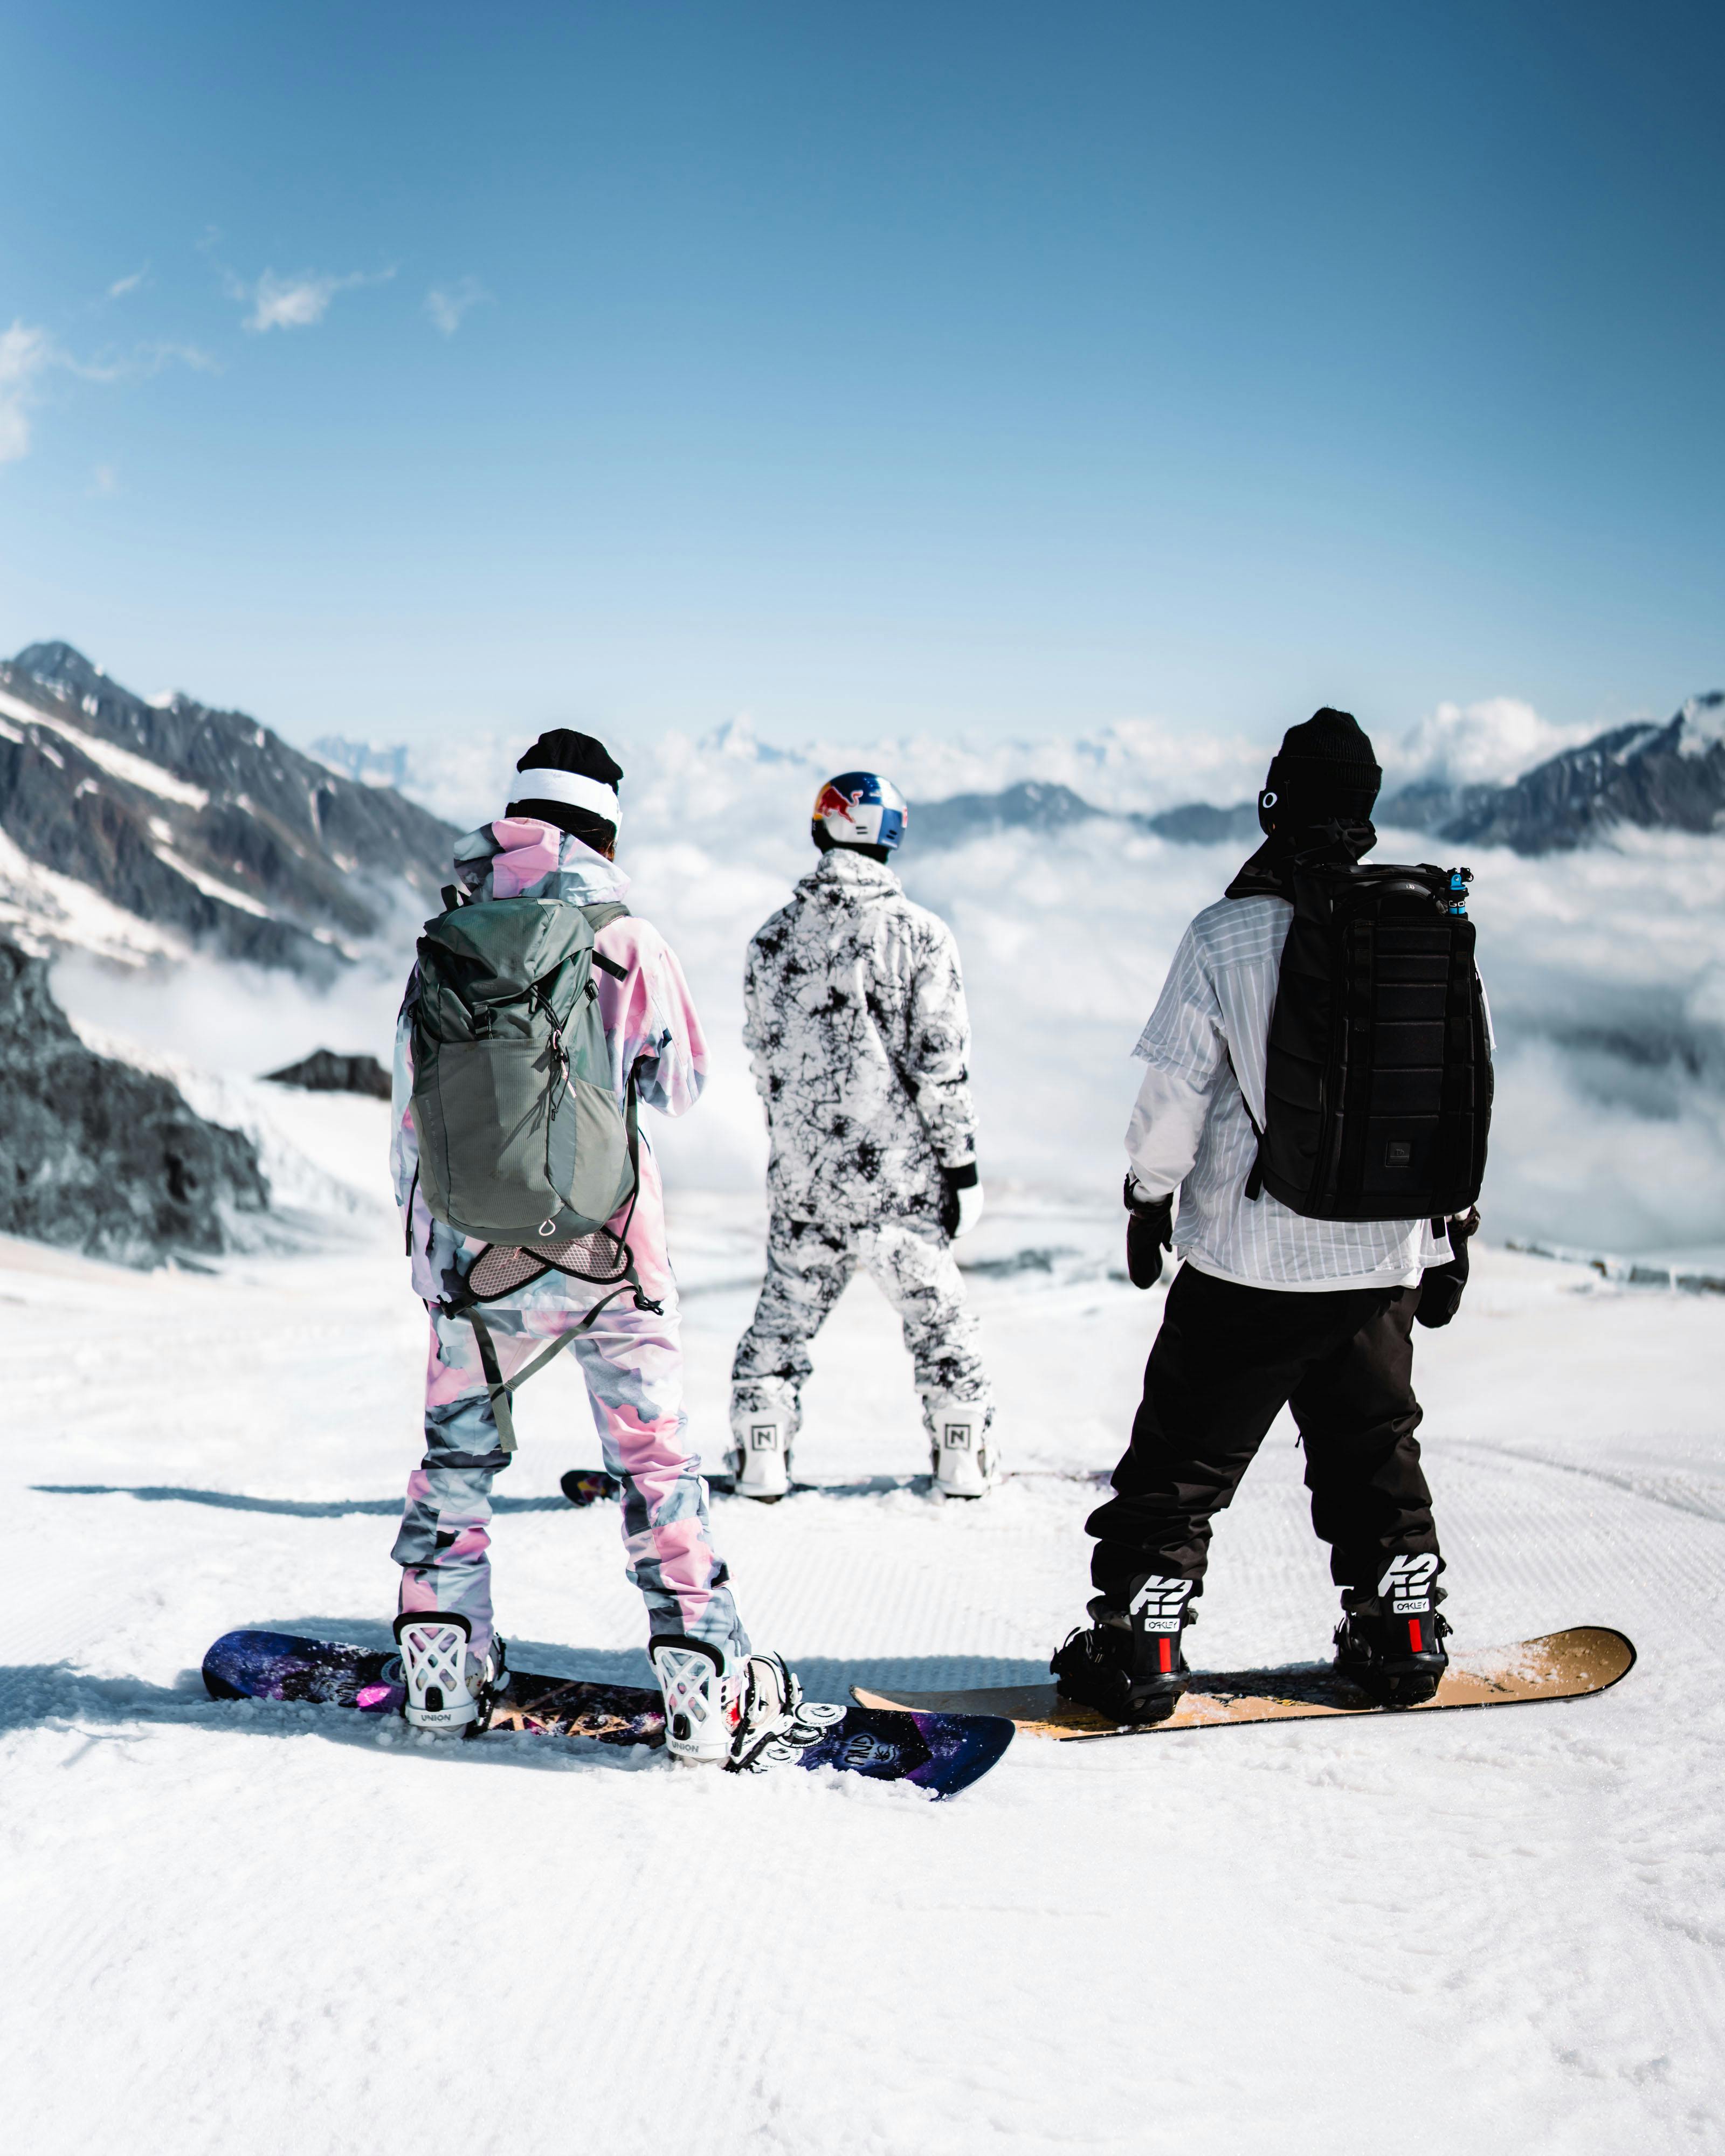 Preparing for your first snowboard grabs